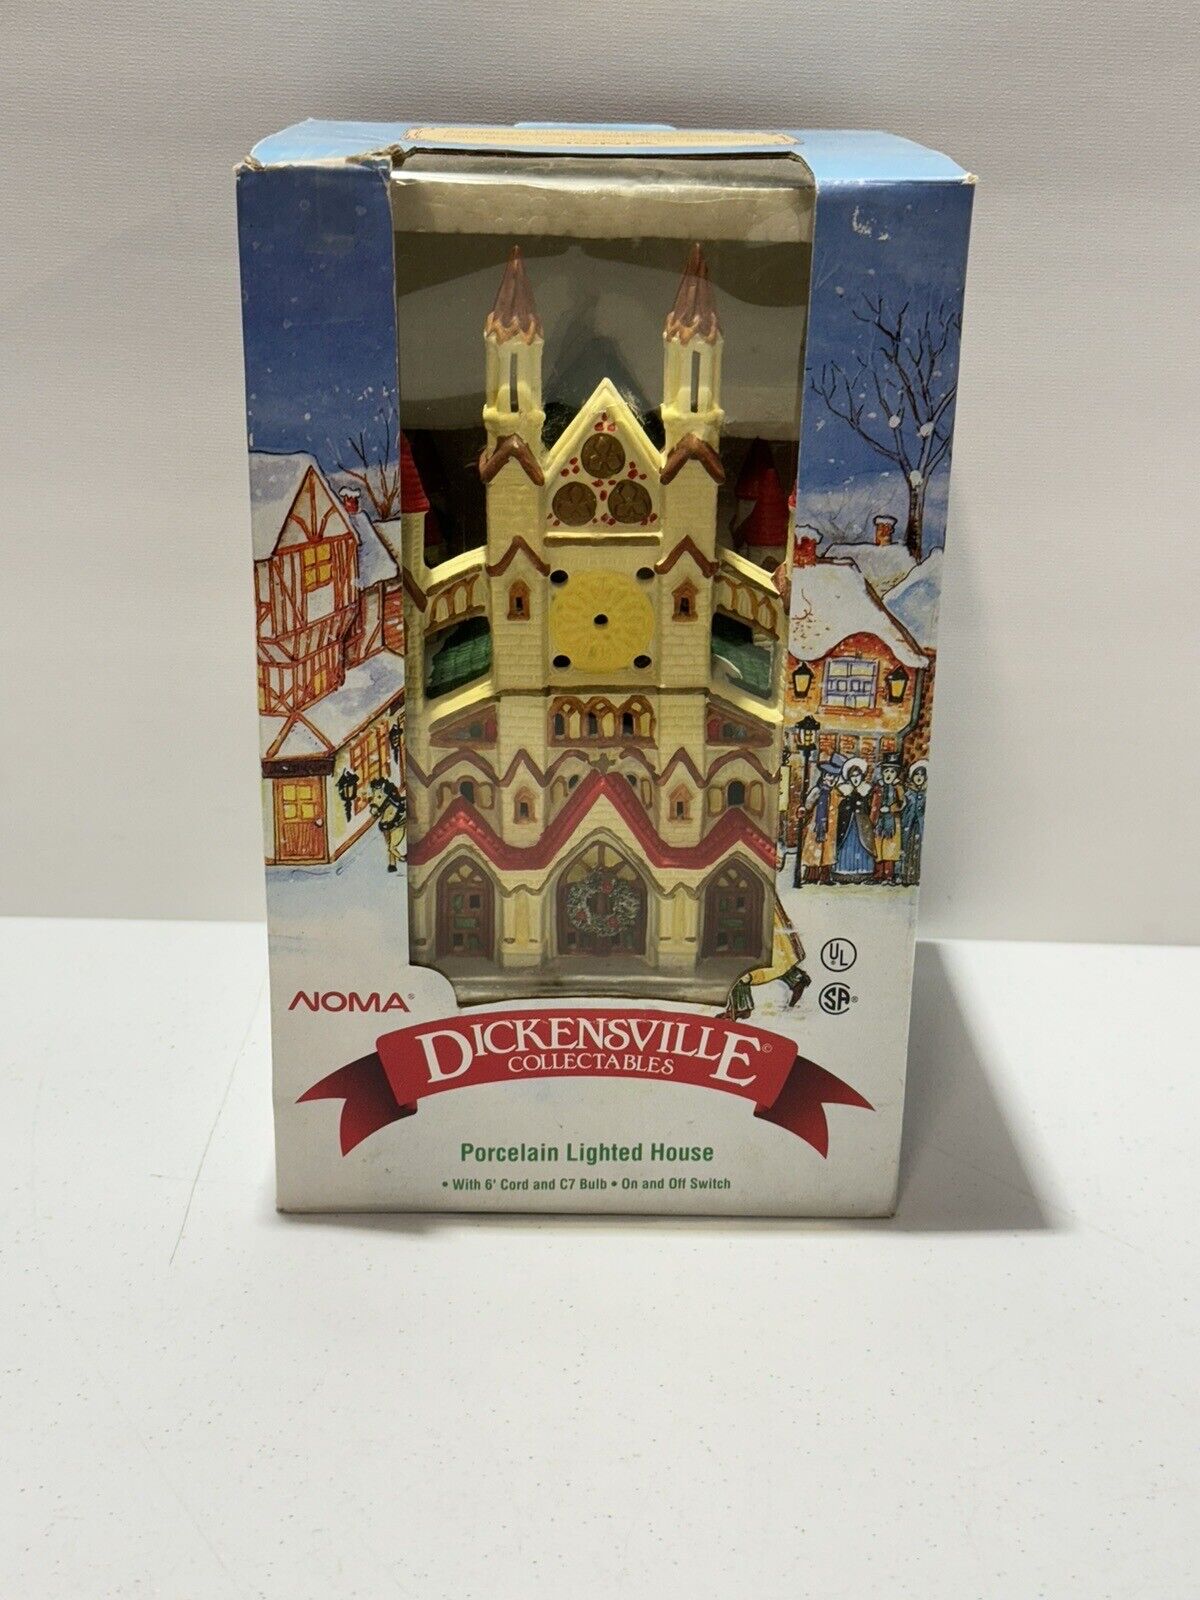 DICKENSVILLE CHRISTMAS VILLAGE LIGHTED PORCELAIN LIGHTED HOUSE CHURCH 1996 NOMA